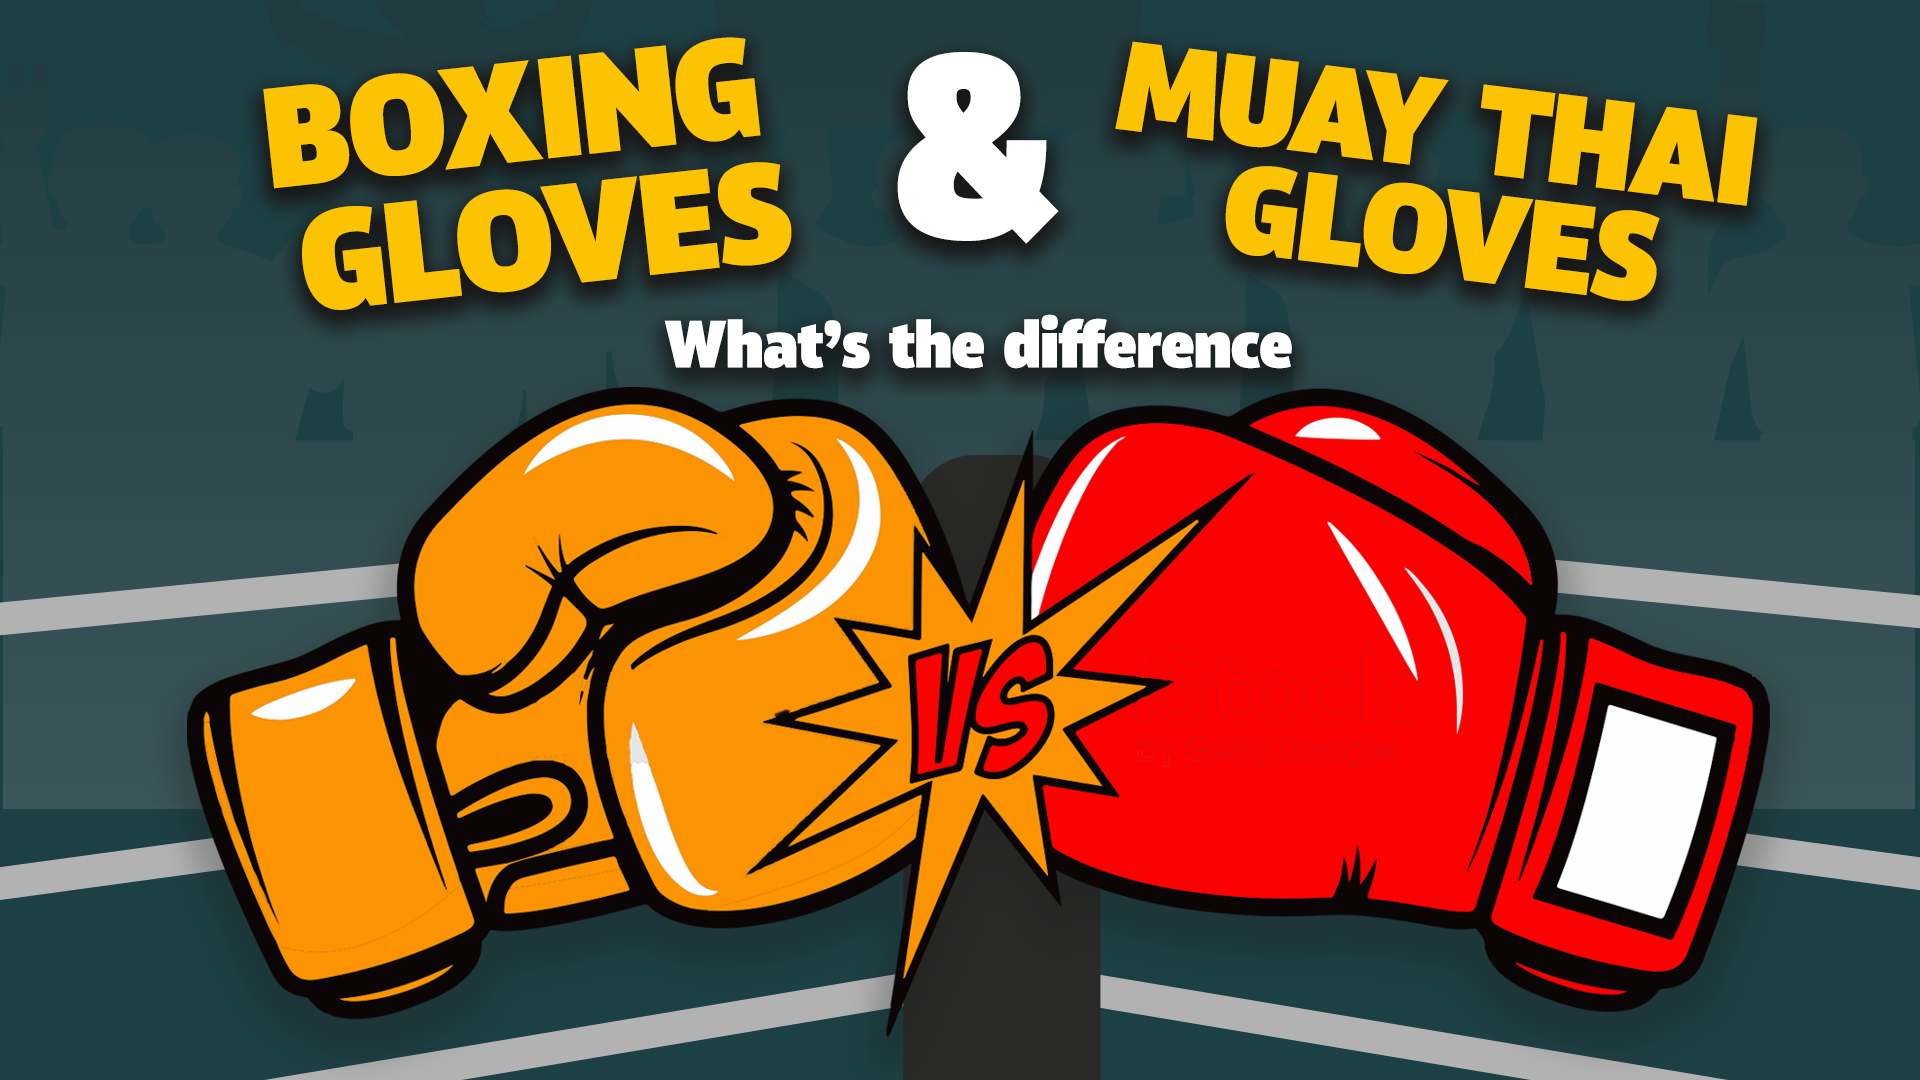 Boxing gloves & Muay Thai gloves: What’s the difference